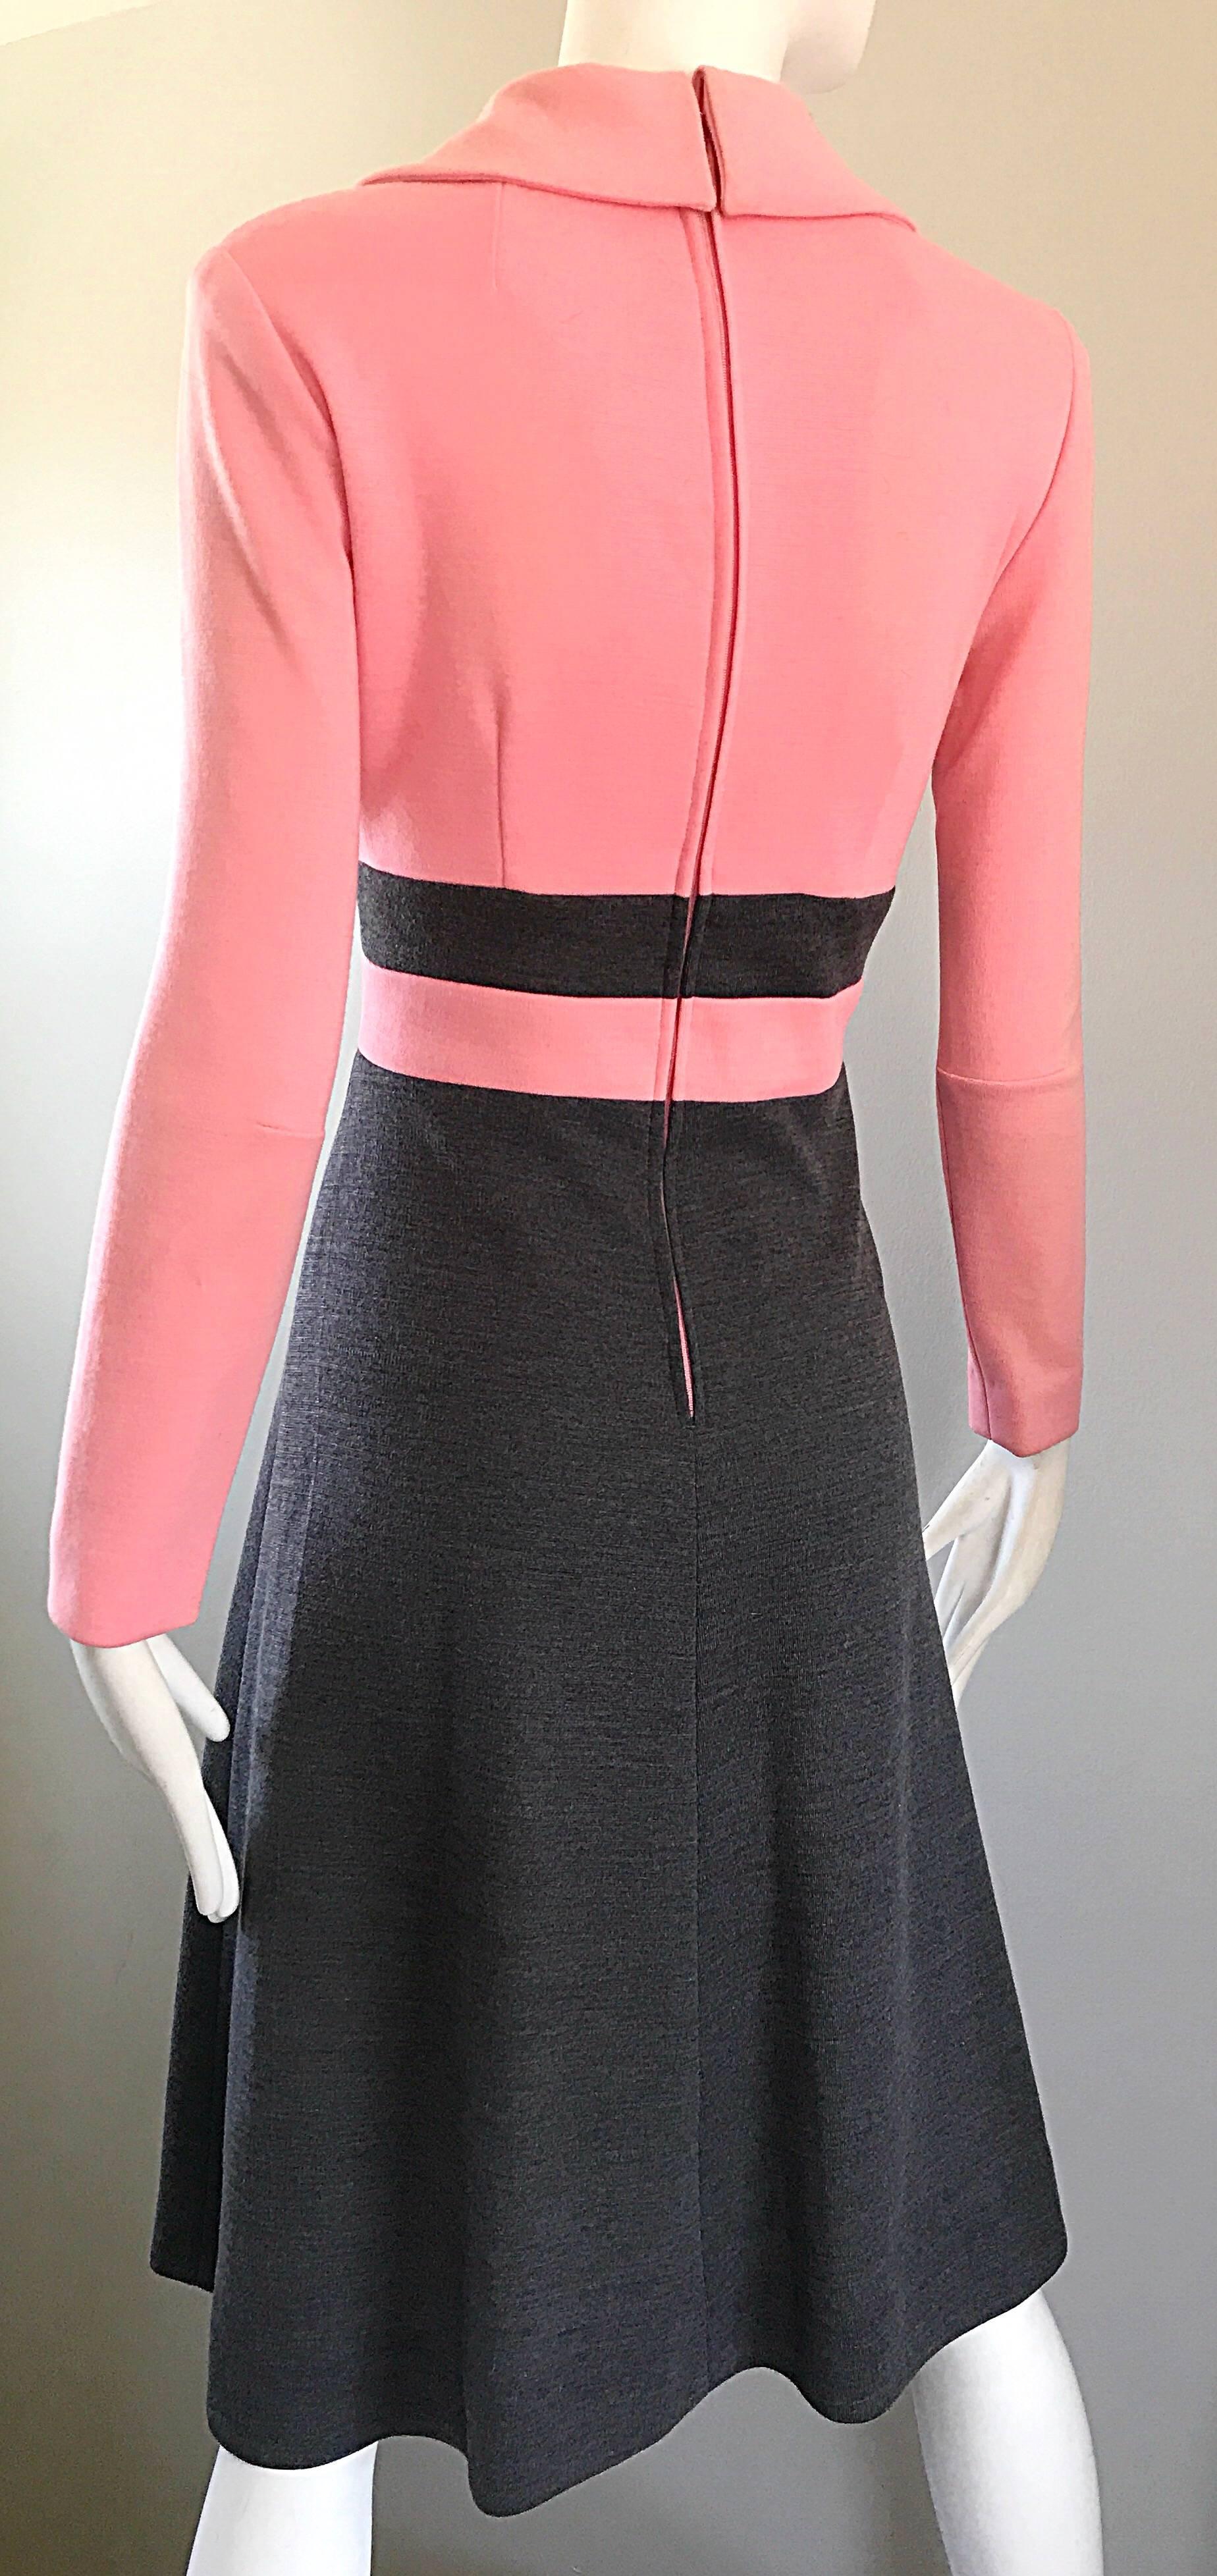 1960s Bubblegum Pink and Charcoal Gray Long Sleeve Vintage 60s Knit A Line Dress 3